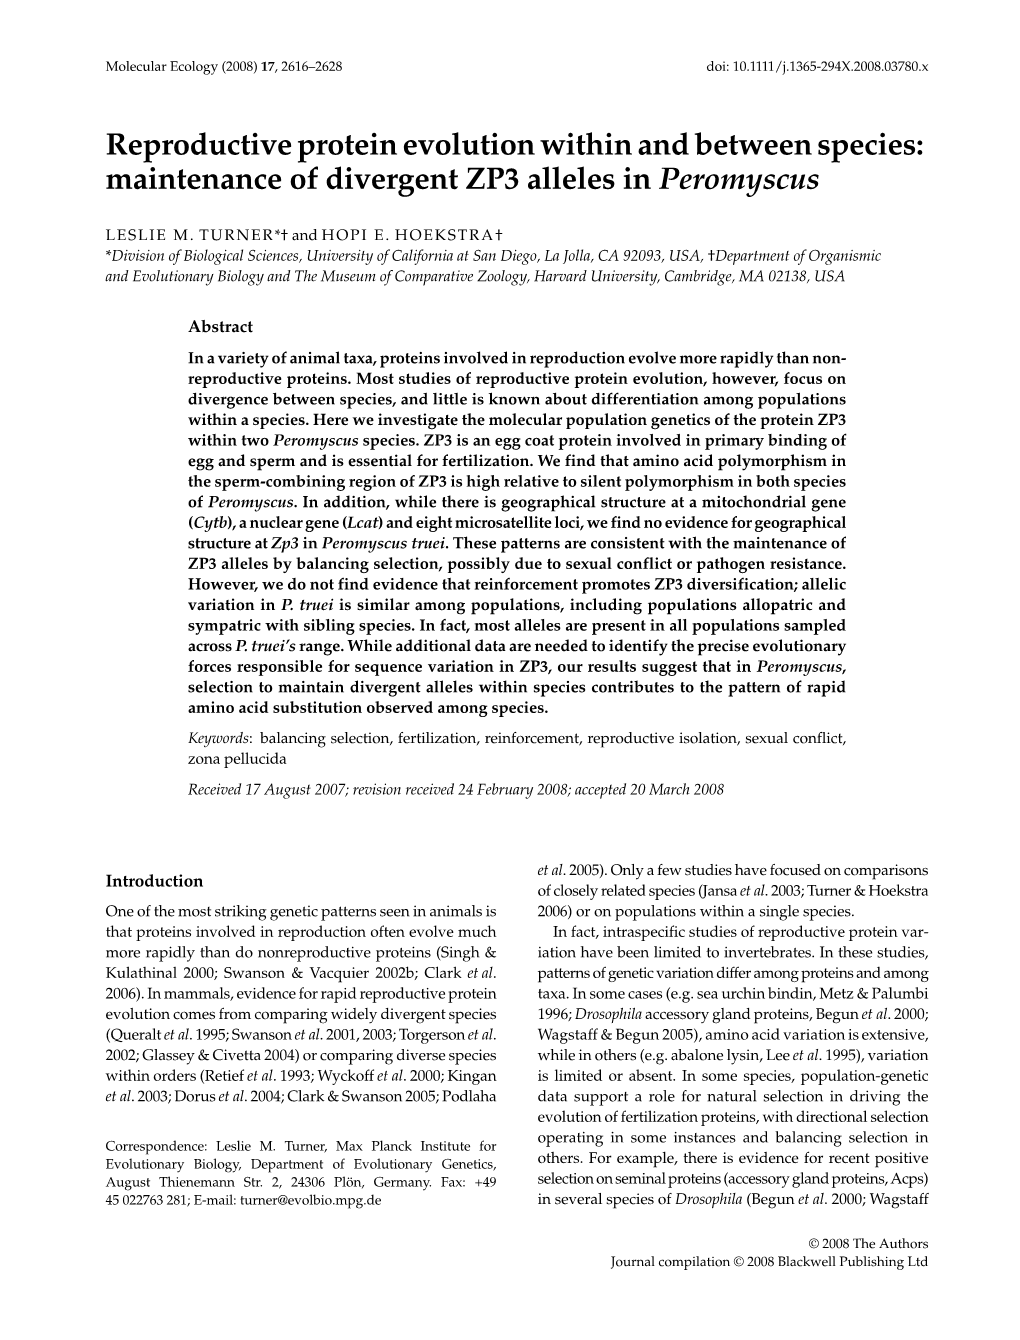 Reproductive Protein Evolution Within and Between Species: Maintenance of Divergent ZP3 Alleles in Peromyscus